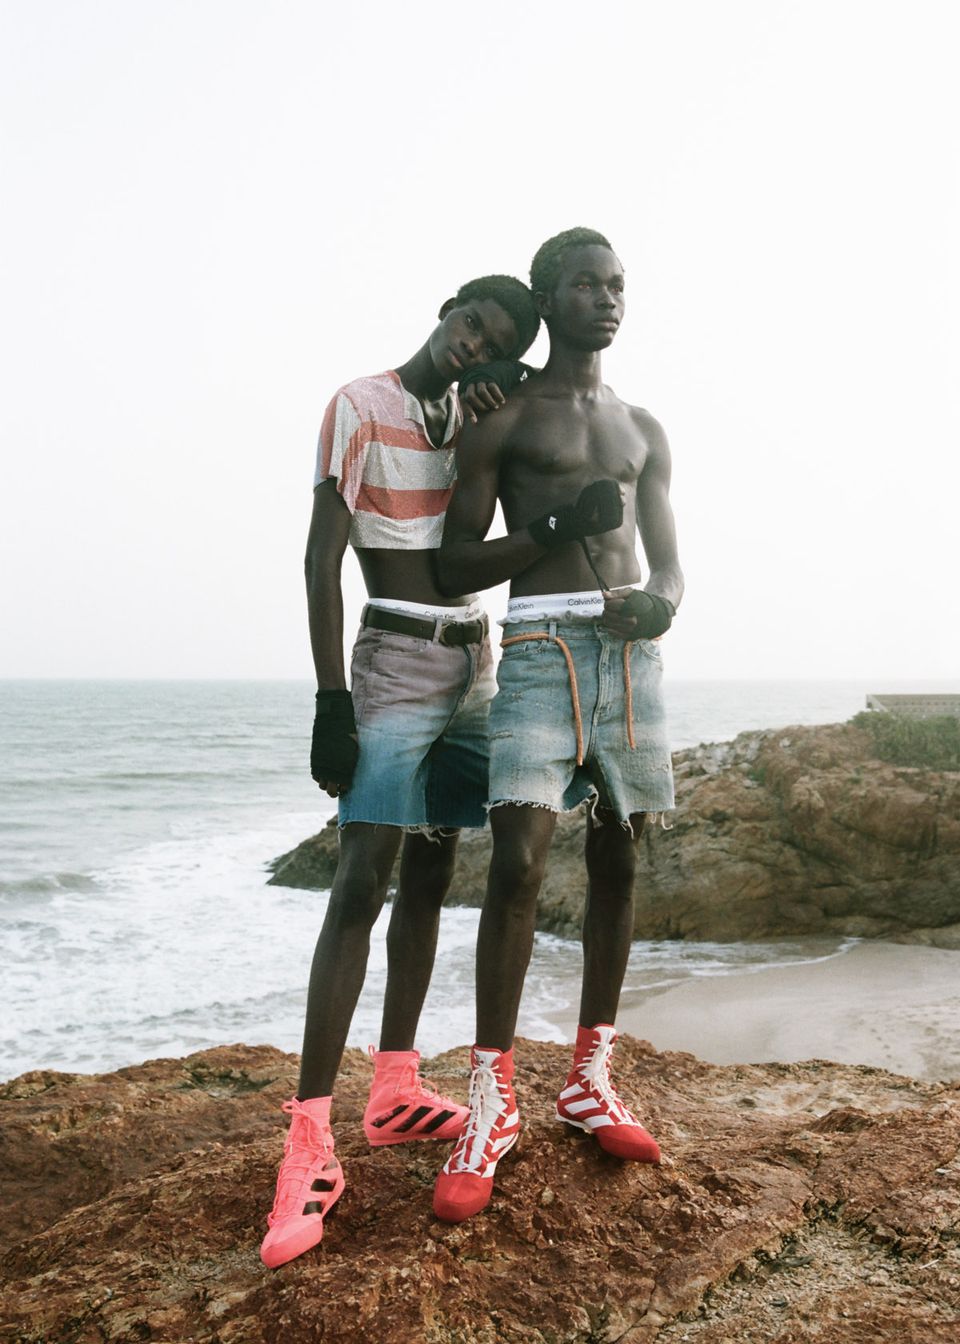 The Sweet Science: Capturing the Capital of Ghanaian Boxing